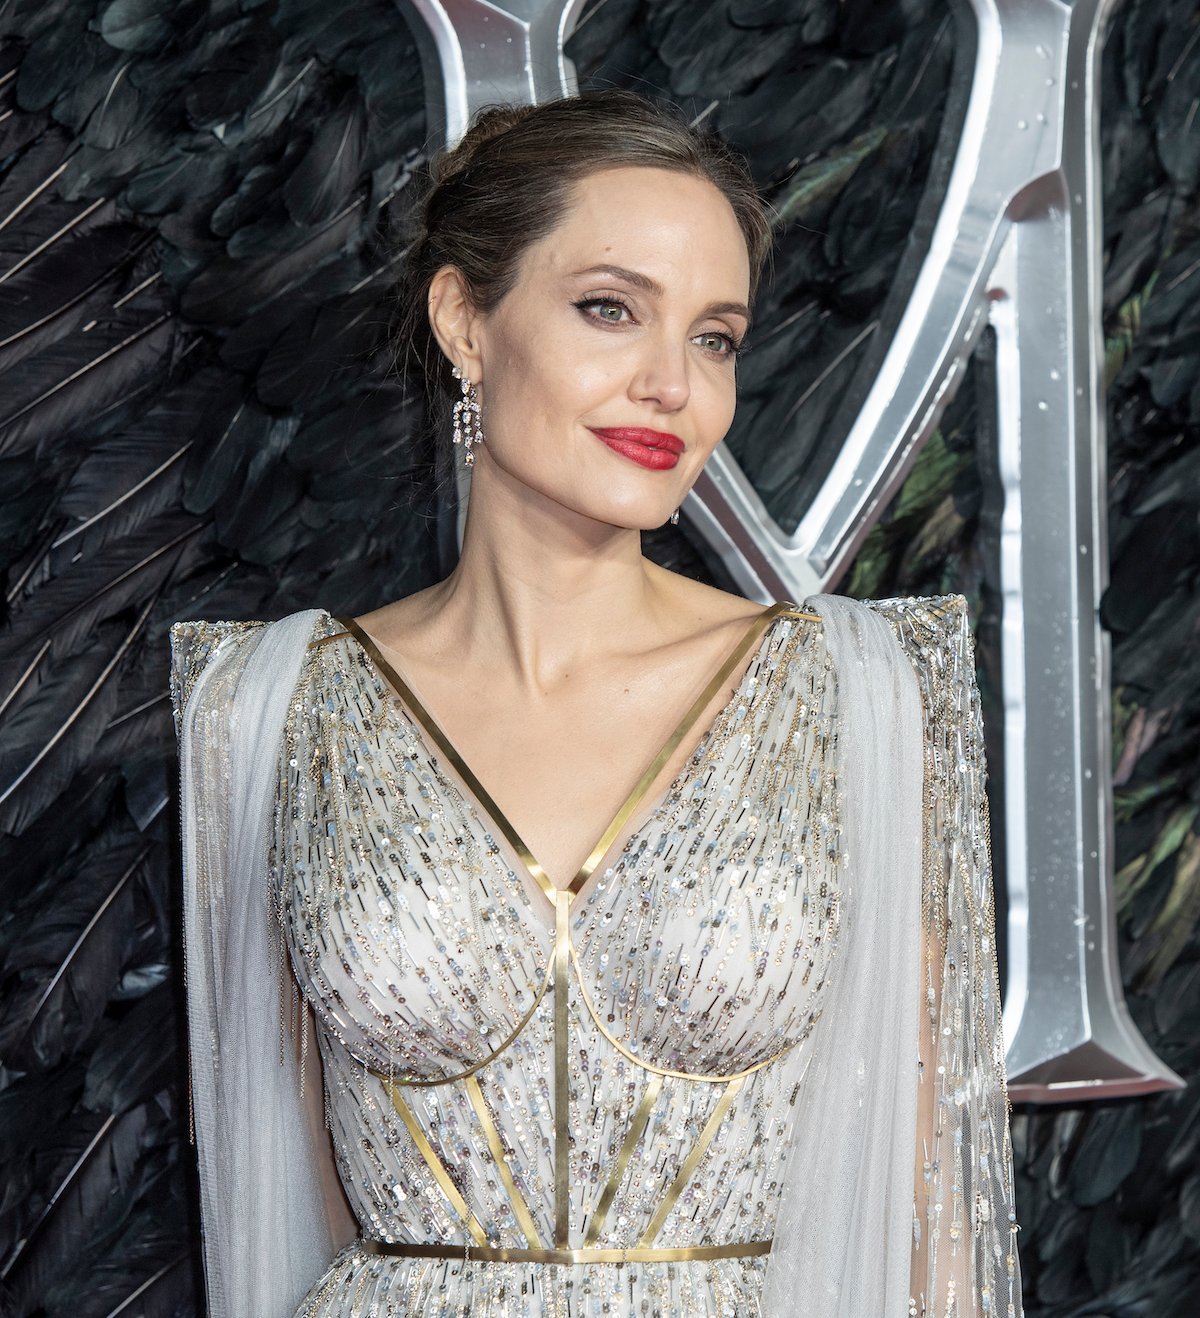 Angelina Jolie wears an embellished white gown and smiles for the camera at an event.